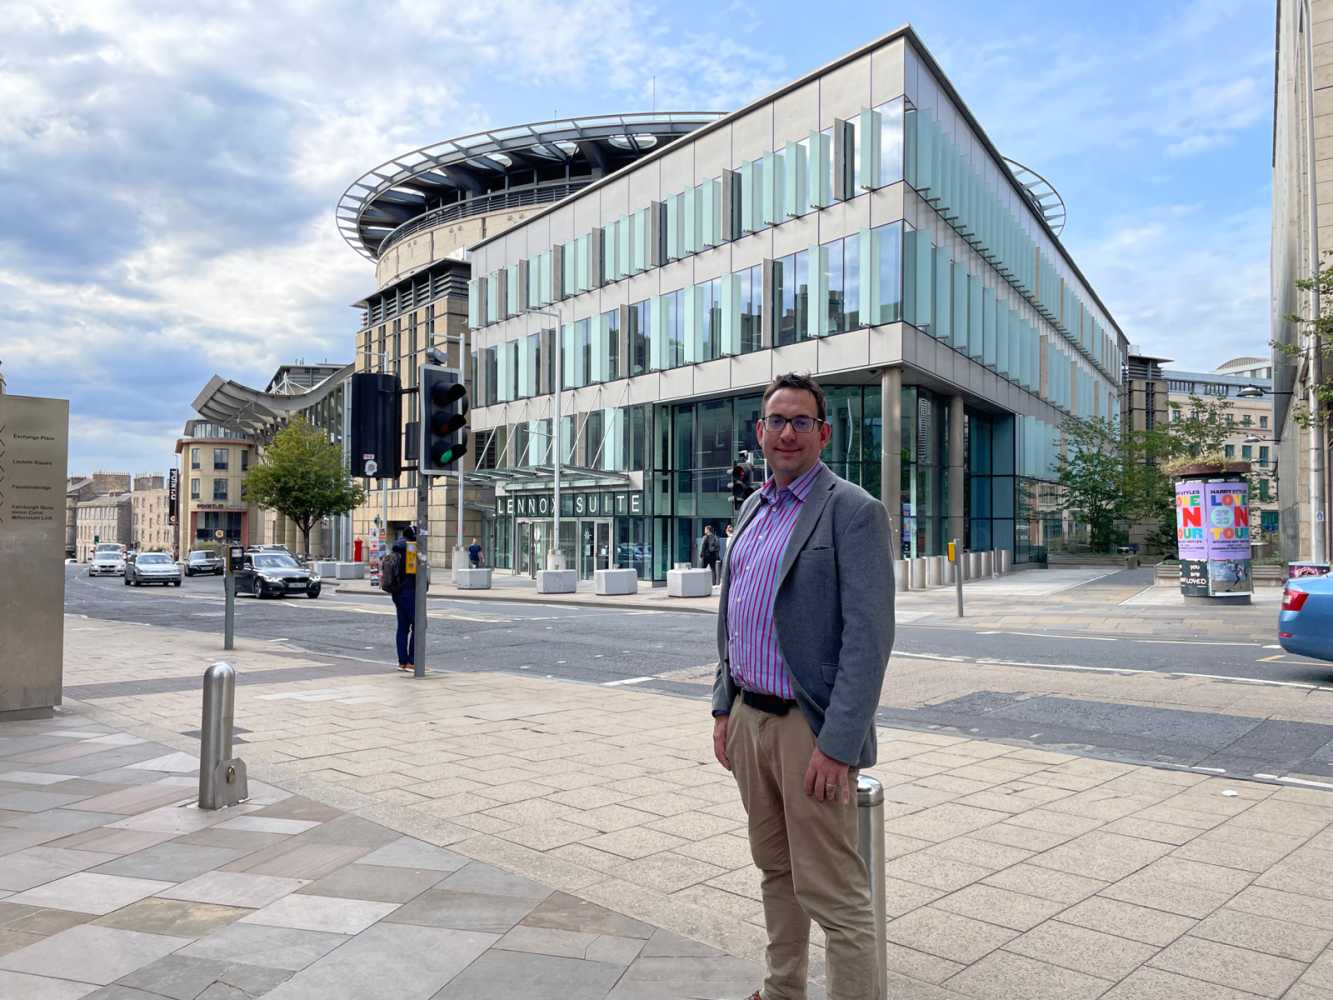 Ollie Jeffery joins the EICC as director of event operations and technology